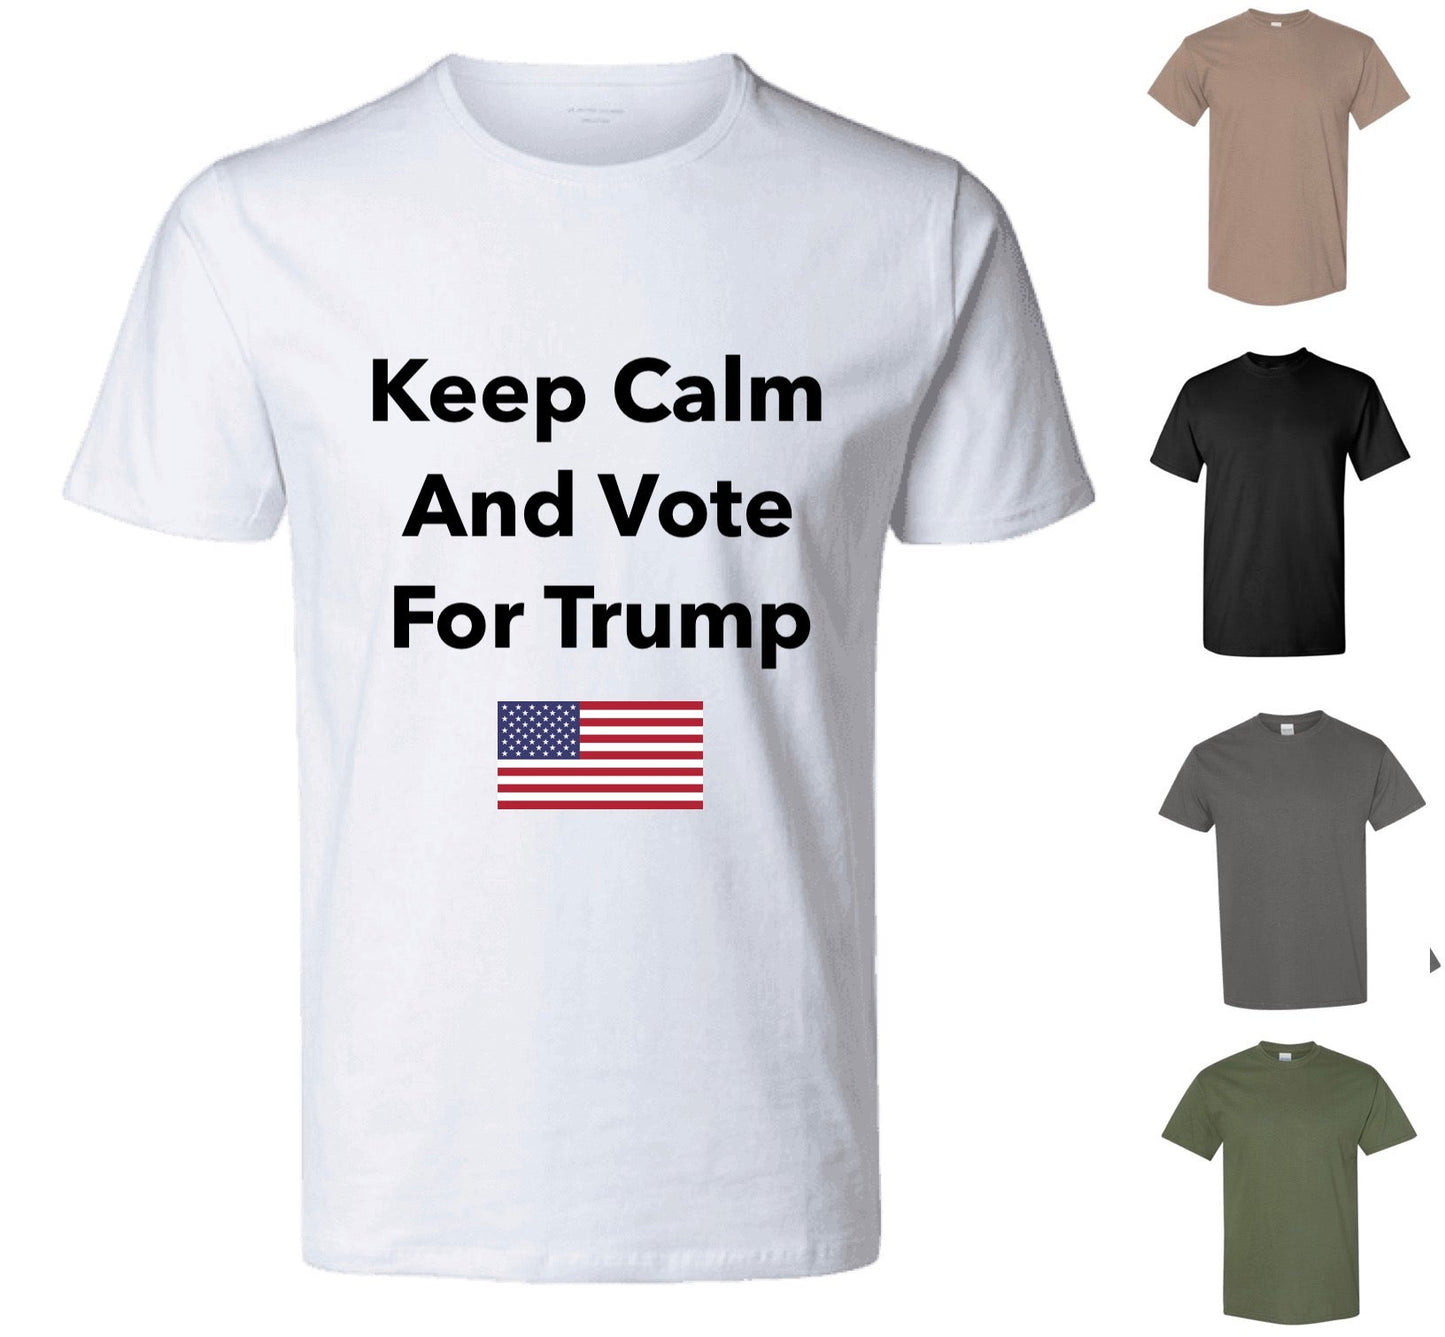 Keep Calm And Vote For Trump T-Shirt — Free Shipping